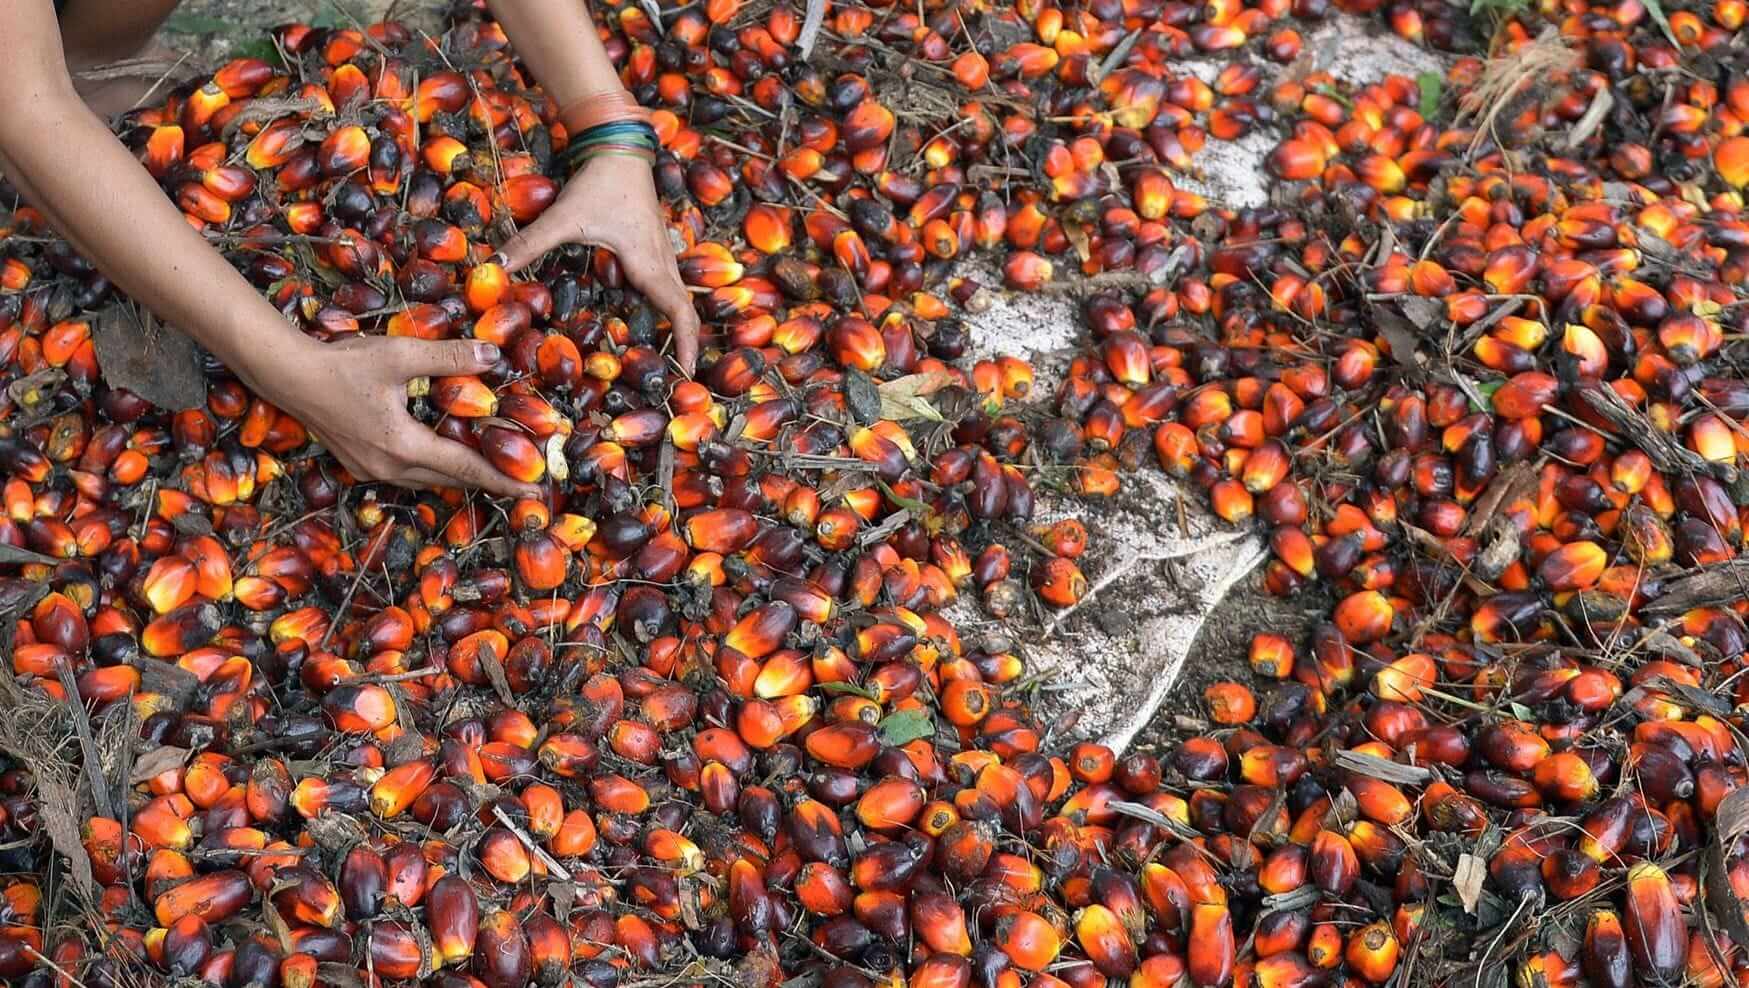 Switzerland to Hold Referendum on FTA With Indonesia Due to Concerns Over Palm Oil Imports